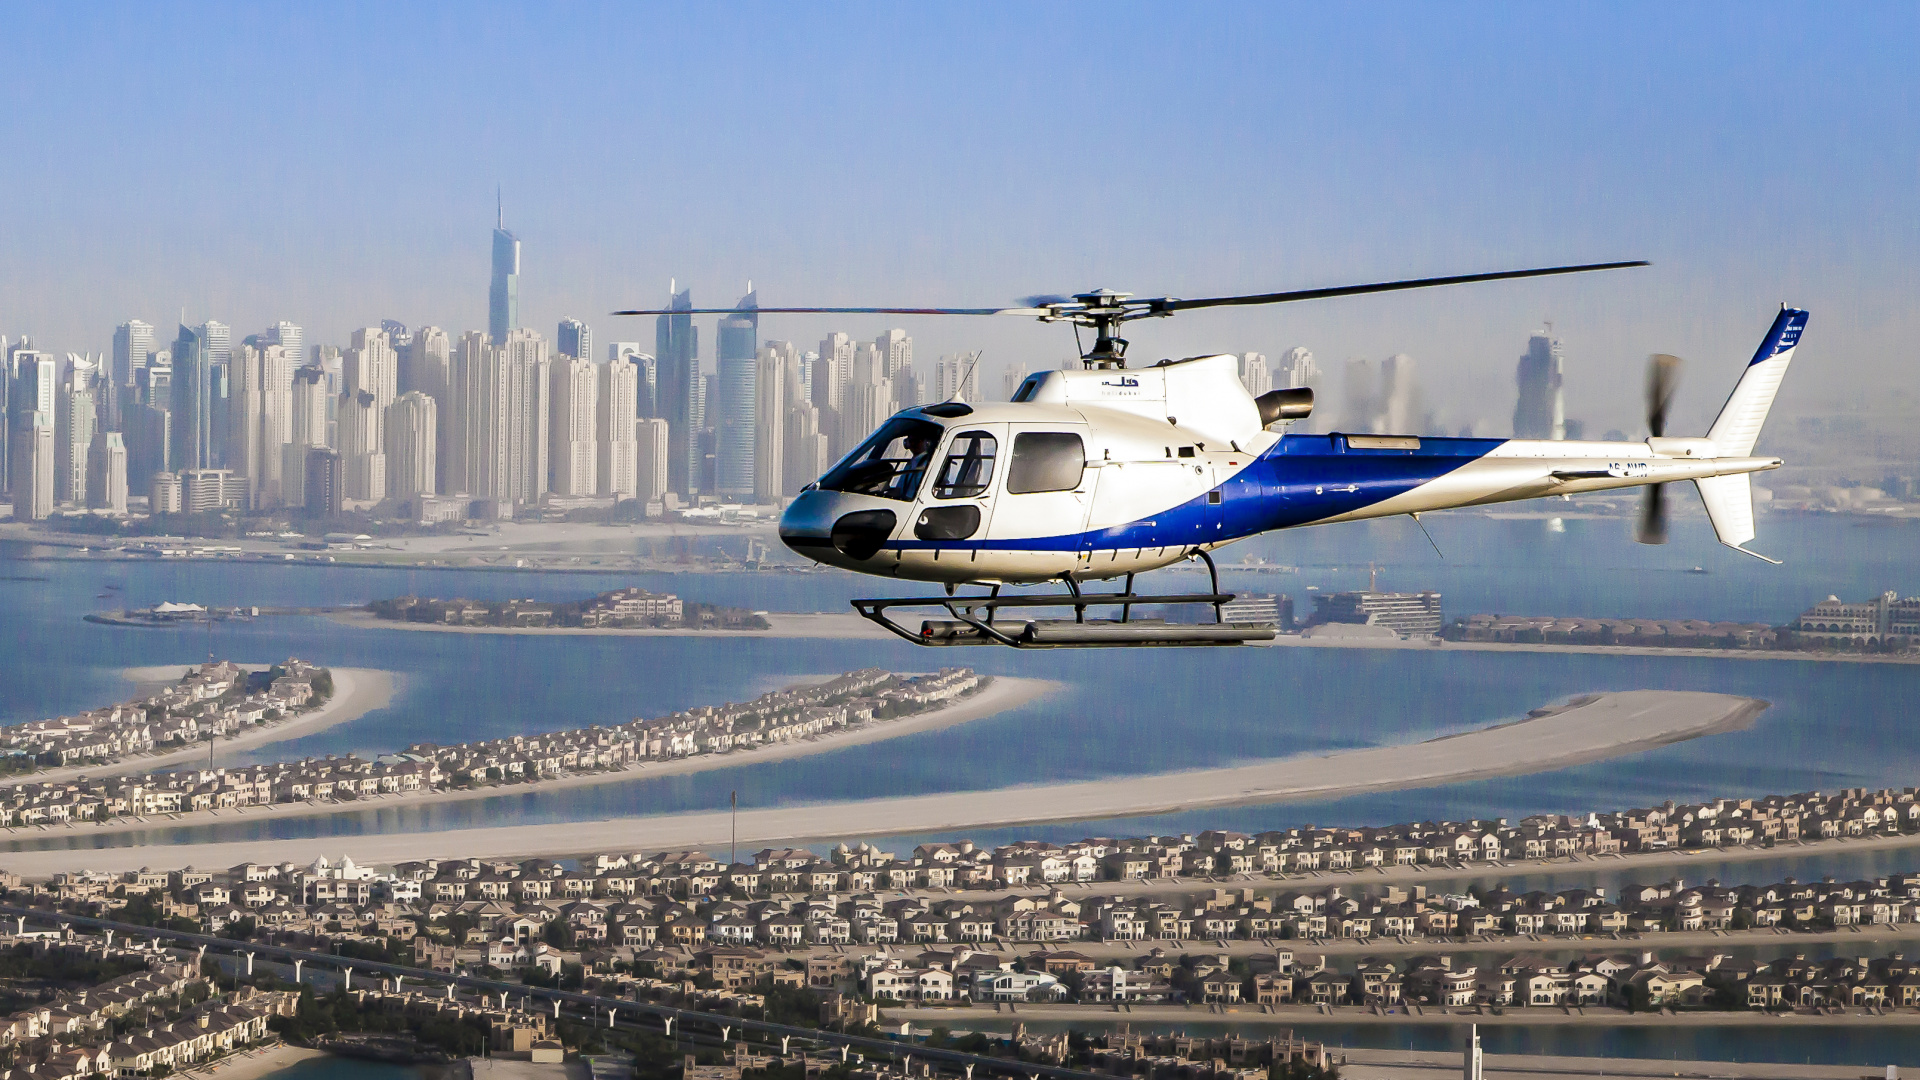 White and Blue Helicopter Flying Over City Buildings During Daytime. Wallpaper in 1920x1080 Resolution